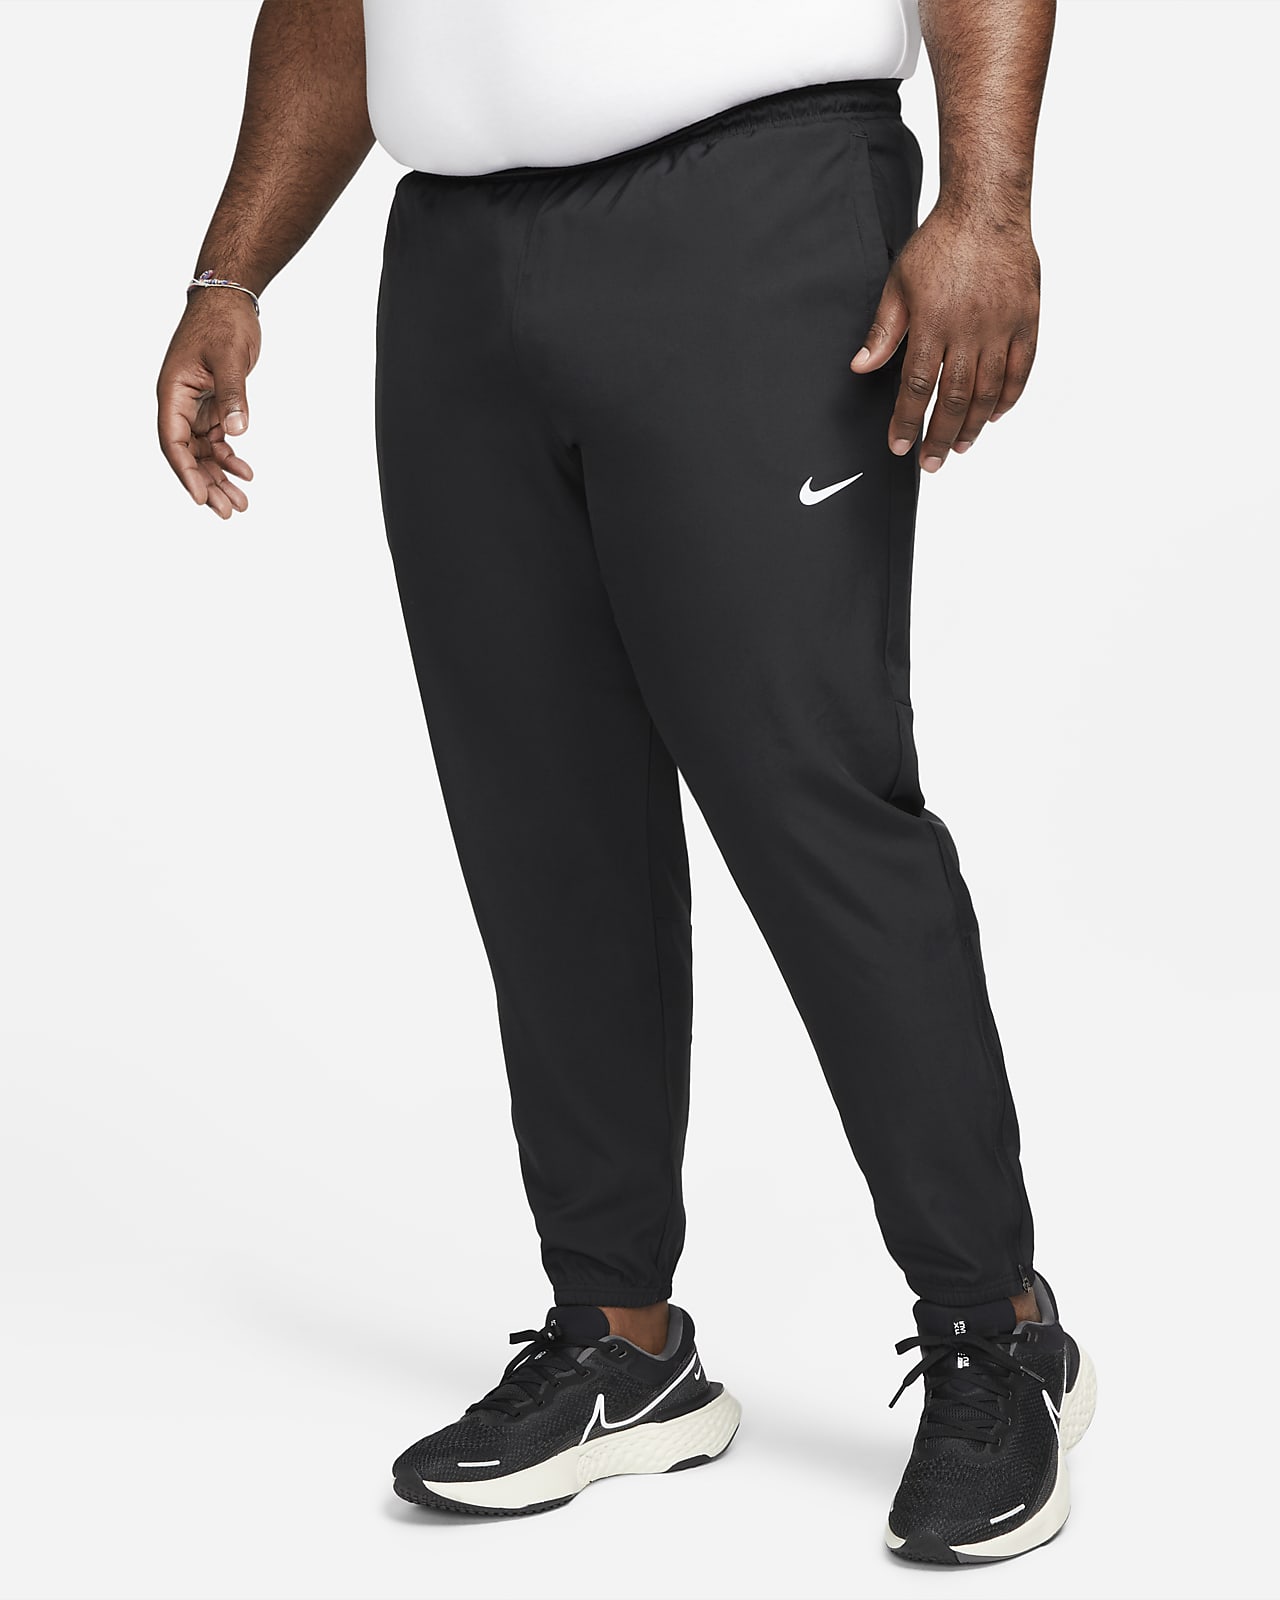 https://static.nike.com/a/images/t_PDP_1280_v1/f_auto,q_auto:eco/154225eb-73fd-4895-bea8-a98caa46cb46/dri-fit-challenger-woven-running-trousers-6n1Cpm.png